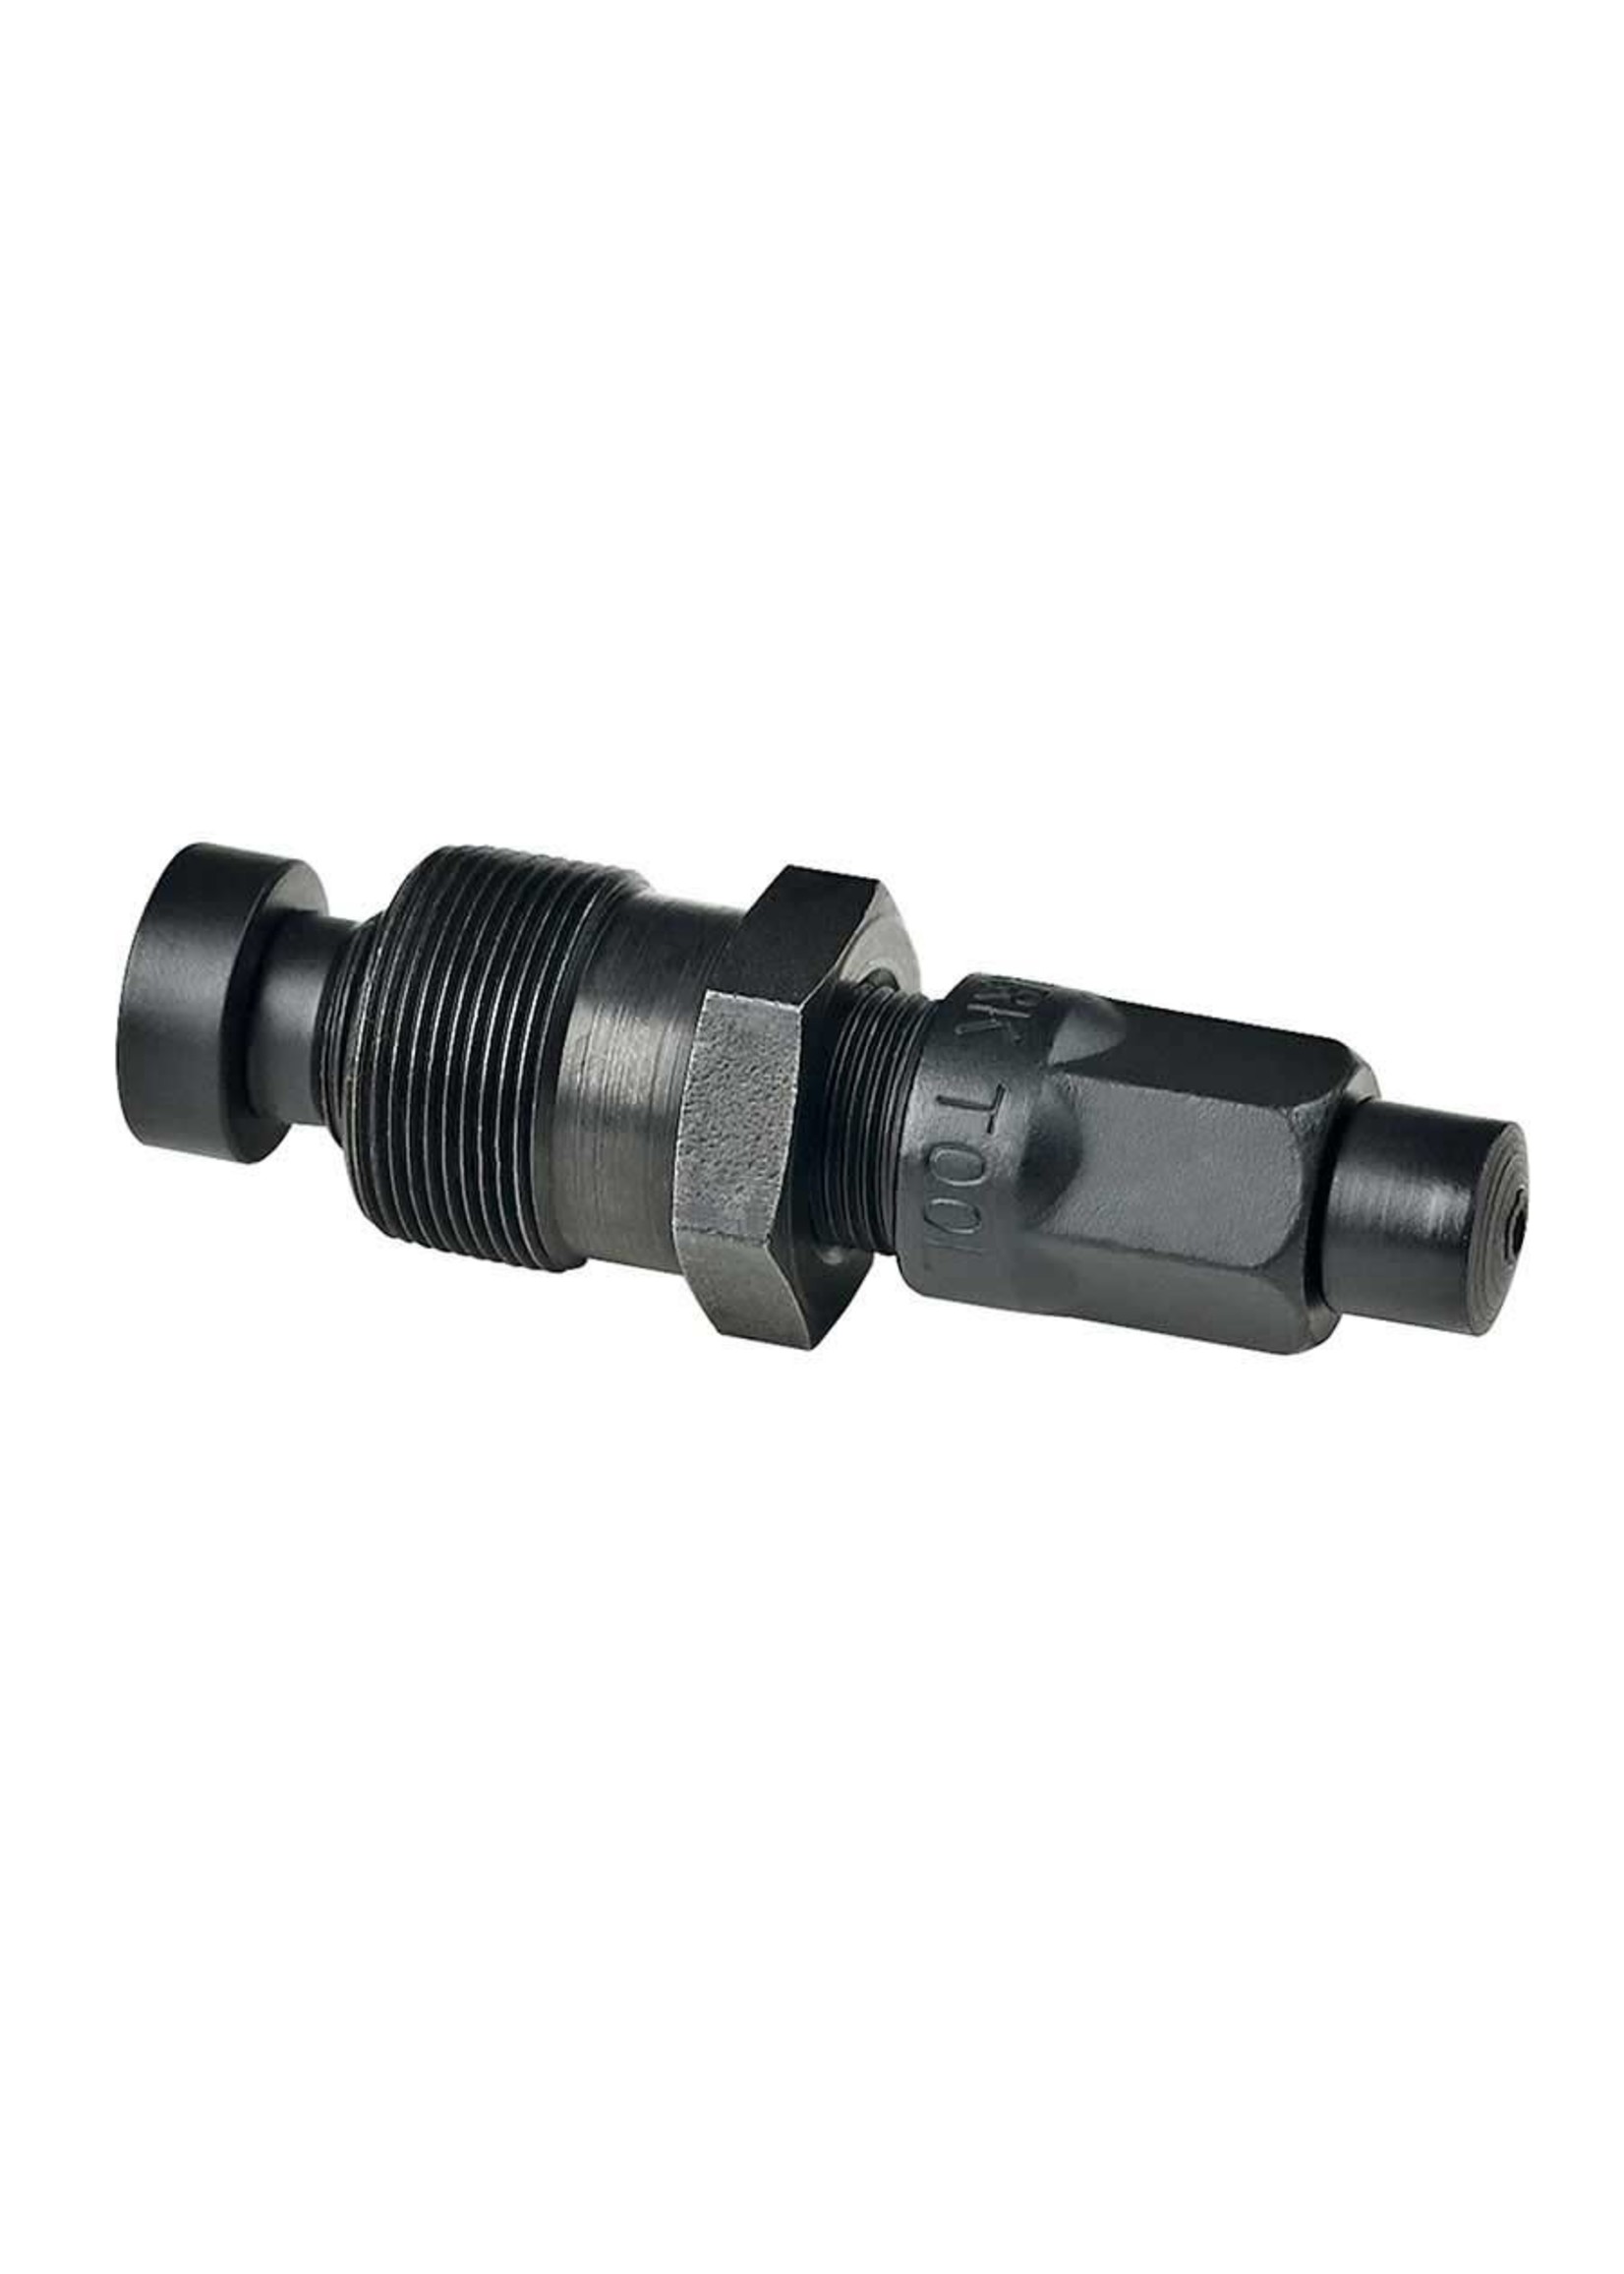 Park Tool Park Tool, CWP-7, Compact crank puller, Fits square tapered and splined bottom brackets